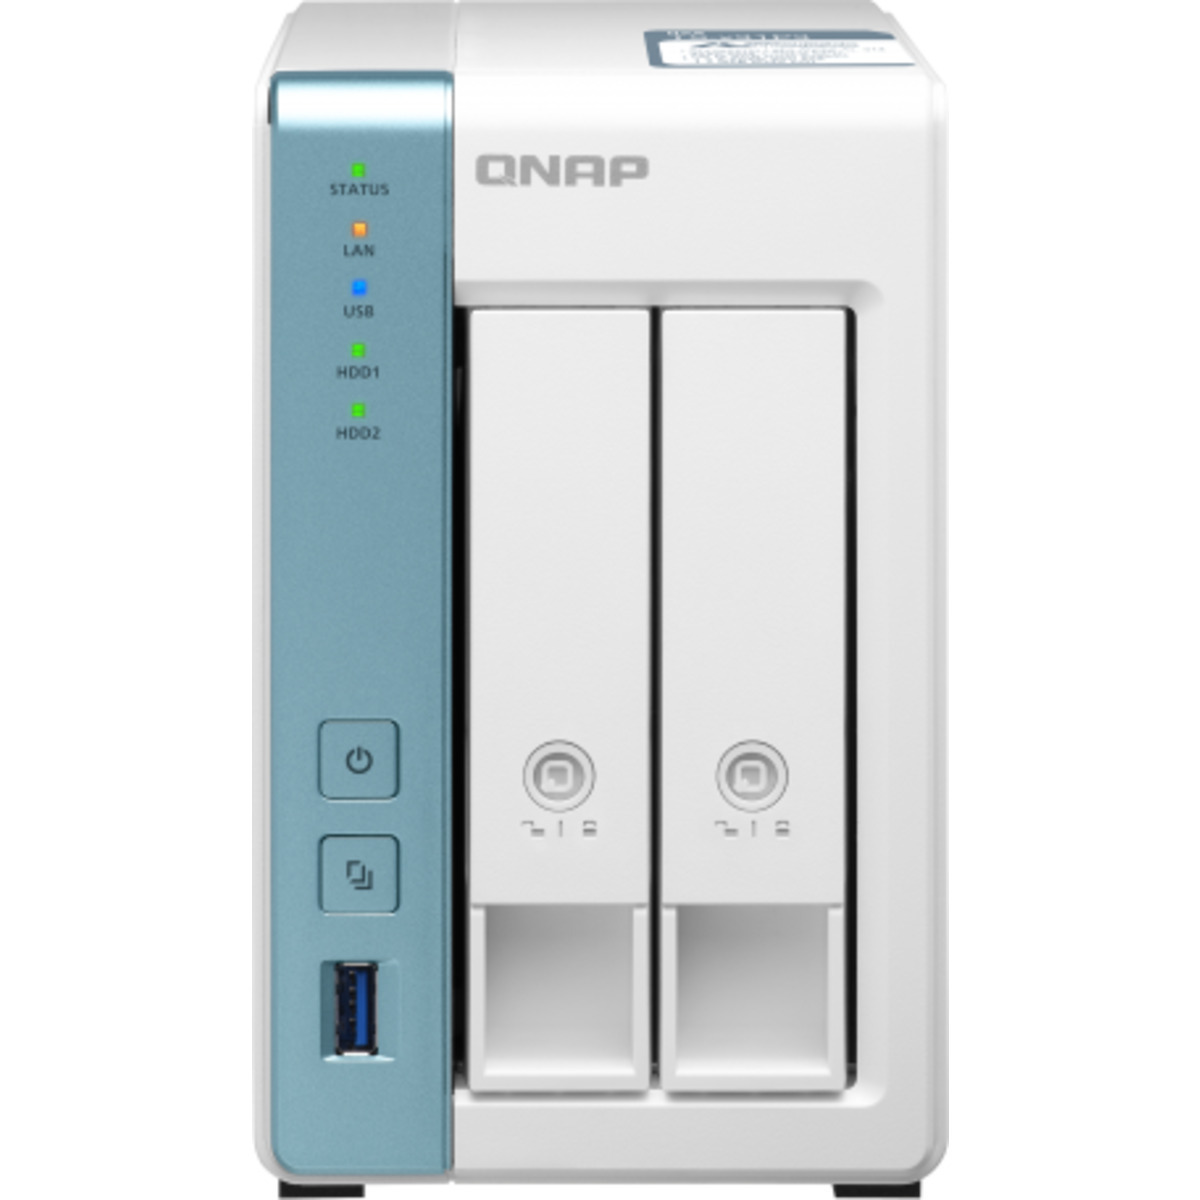 buy $858 QNAP TS-231P3 16tb Desktop NAS - Network Attached Storage Device 2x8000gb Toshiba Enterprise Capacity MG08ADA800E 3.5 7200rpm SATA 6Gb/s HDD ENTERPRISE Class Drives Installed - Burn-In Tested - ON SALE - FREE RAM UPGRADE - nas headquarters buy network attached storage server device das new raid-5 free shipping usa christmas new year holiday sale TS-231P3